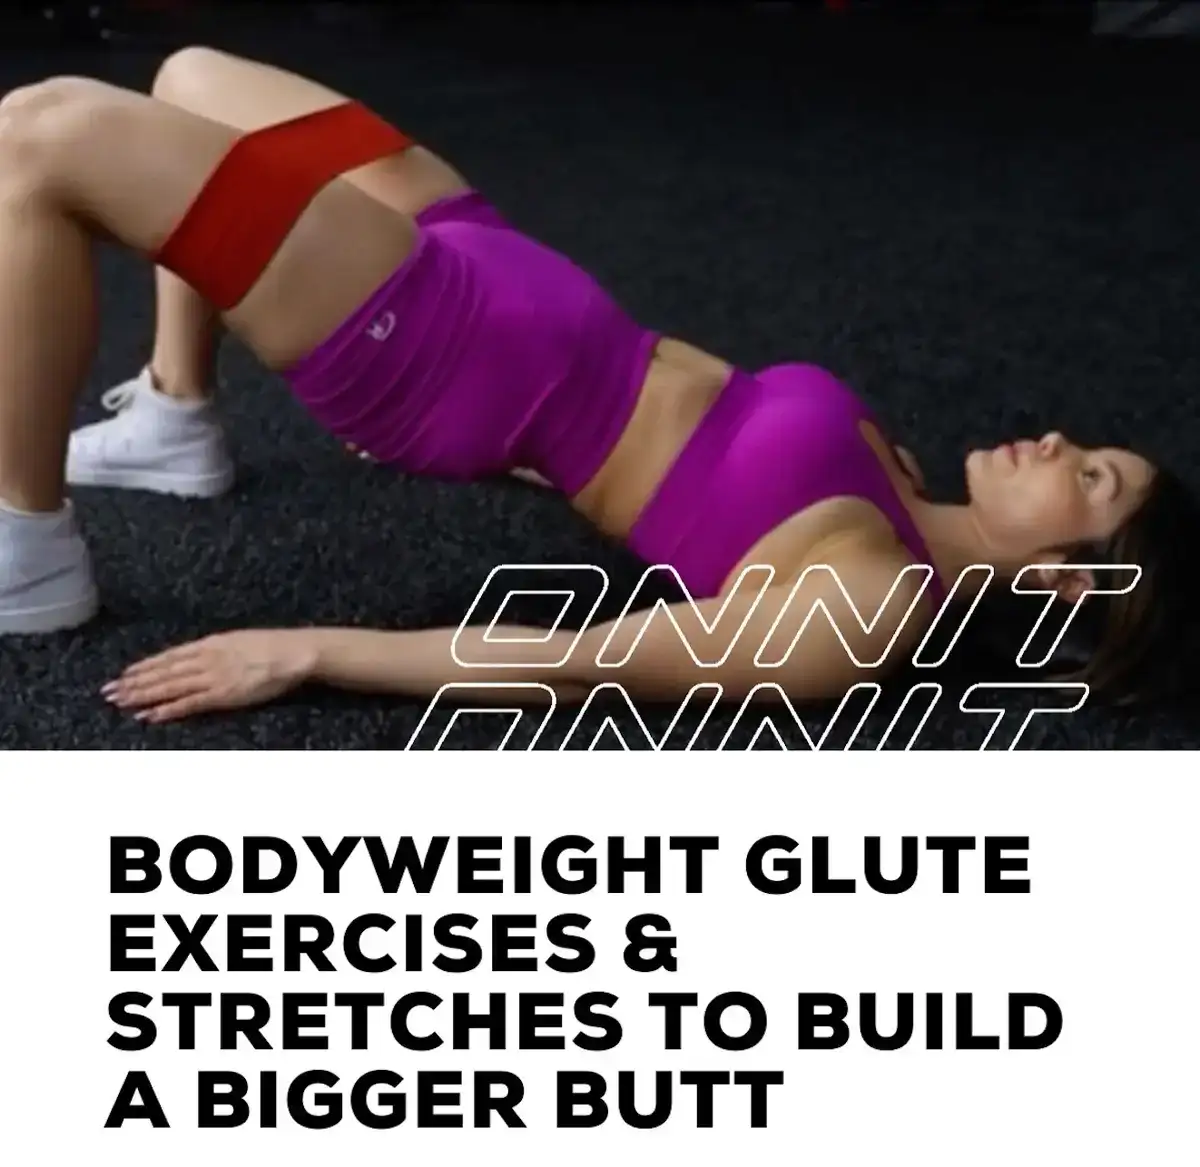 Bodyweight Glute Exercises & Stretches to Build a Bigger Butt